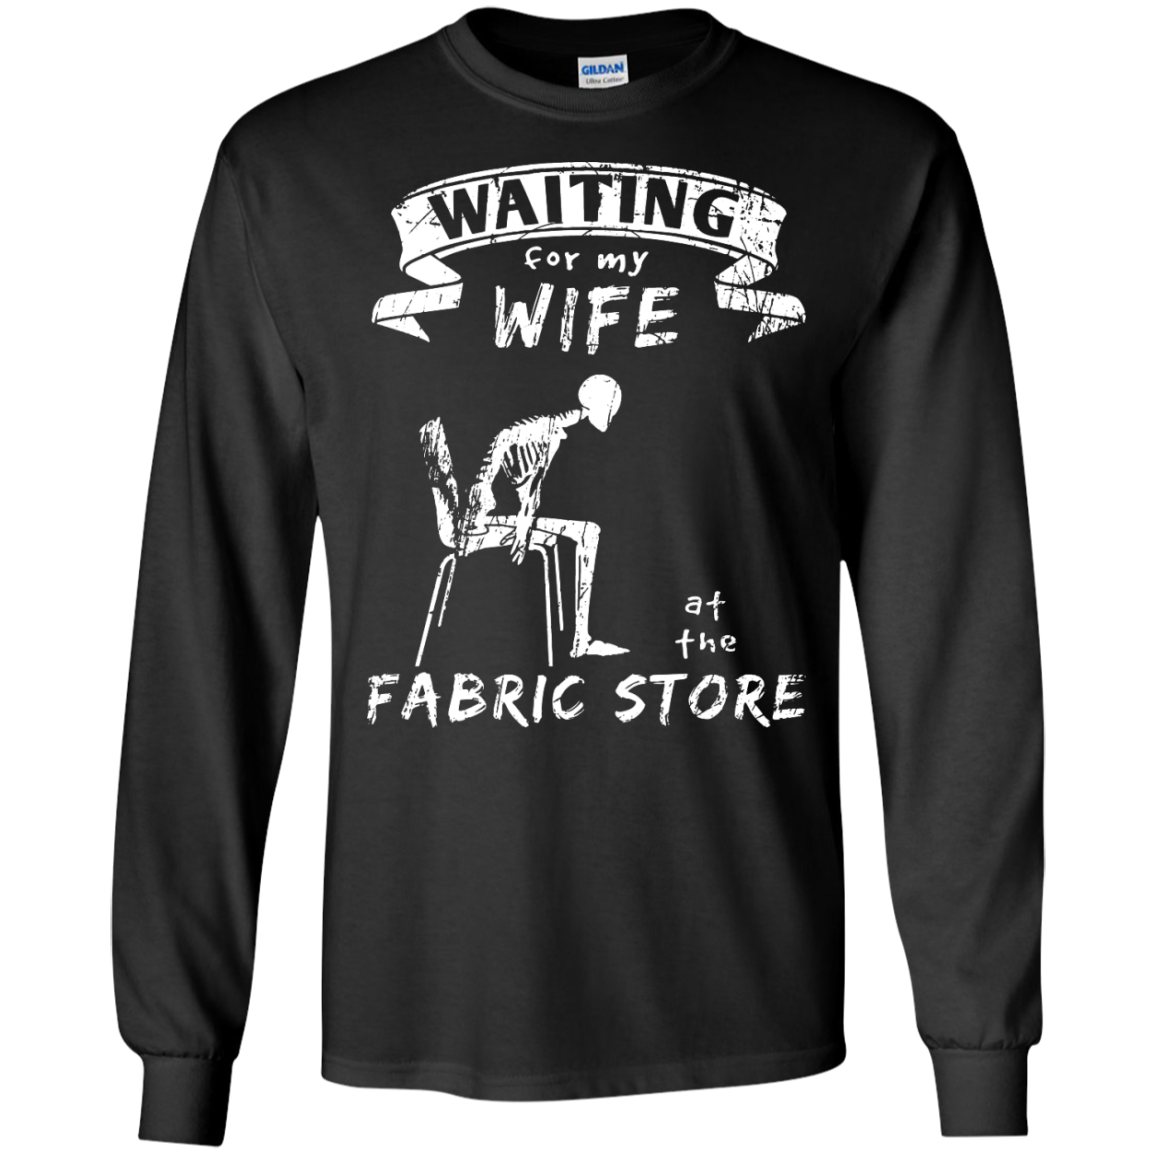 Waiting at the Fabric Store Long Sleeve T-Shirts - Crafter4Life - 2